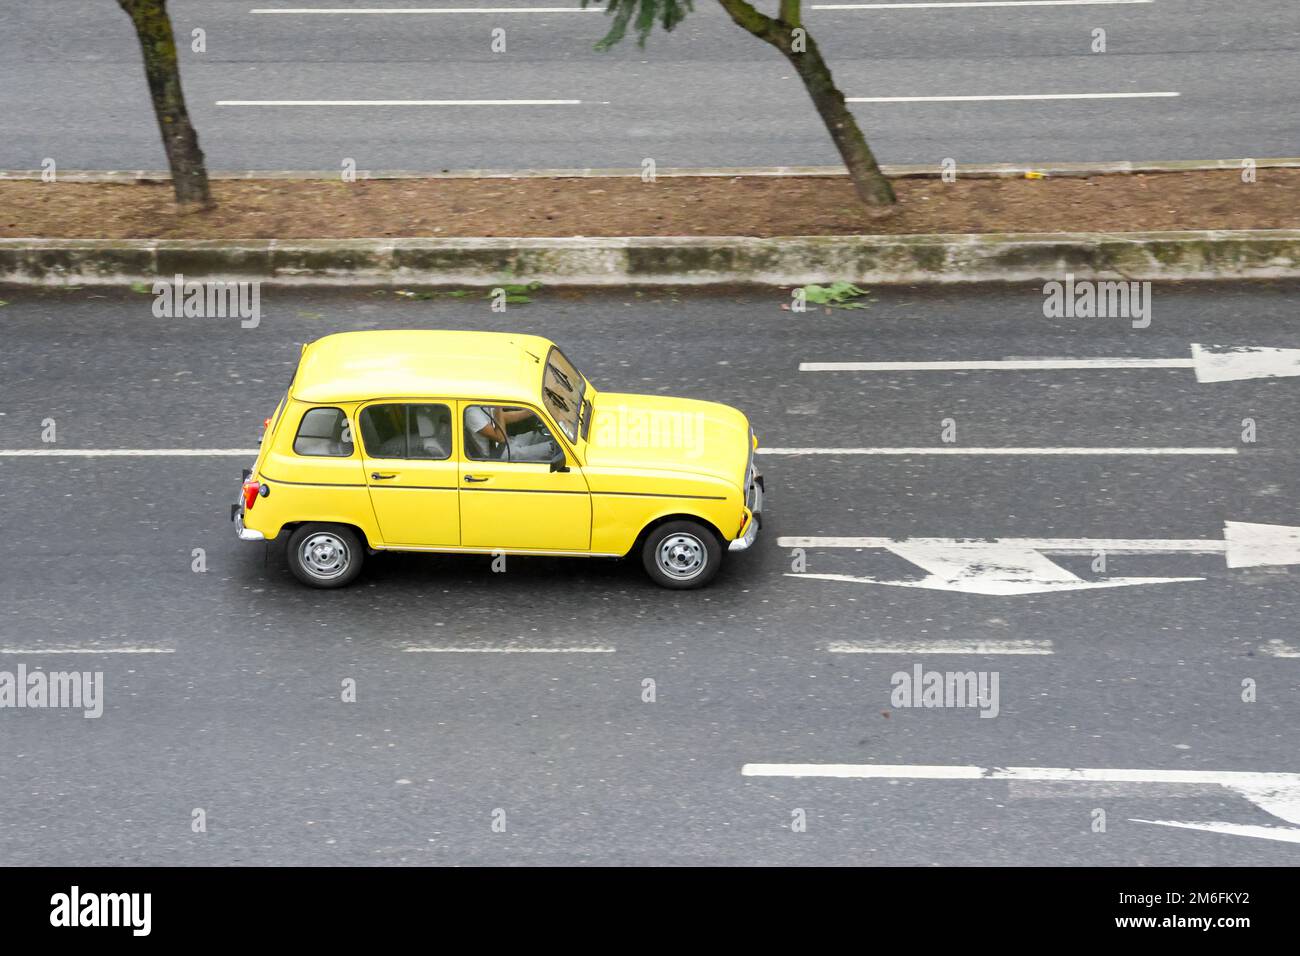 The Historic vehicle from the manufacturer Renault model 4L in yellow color Stock Photo